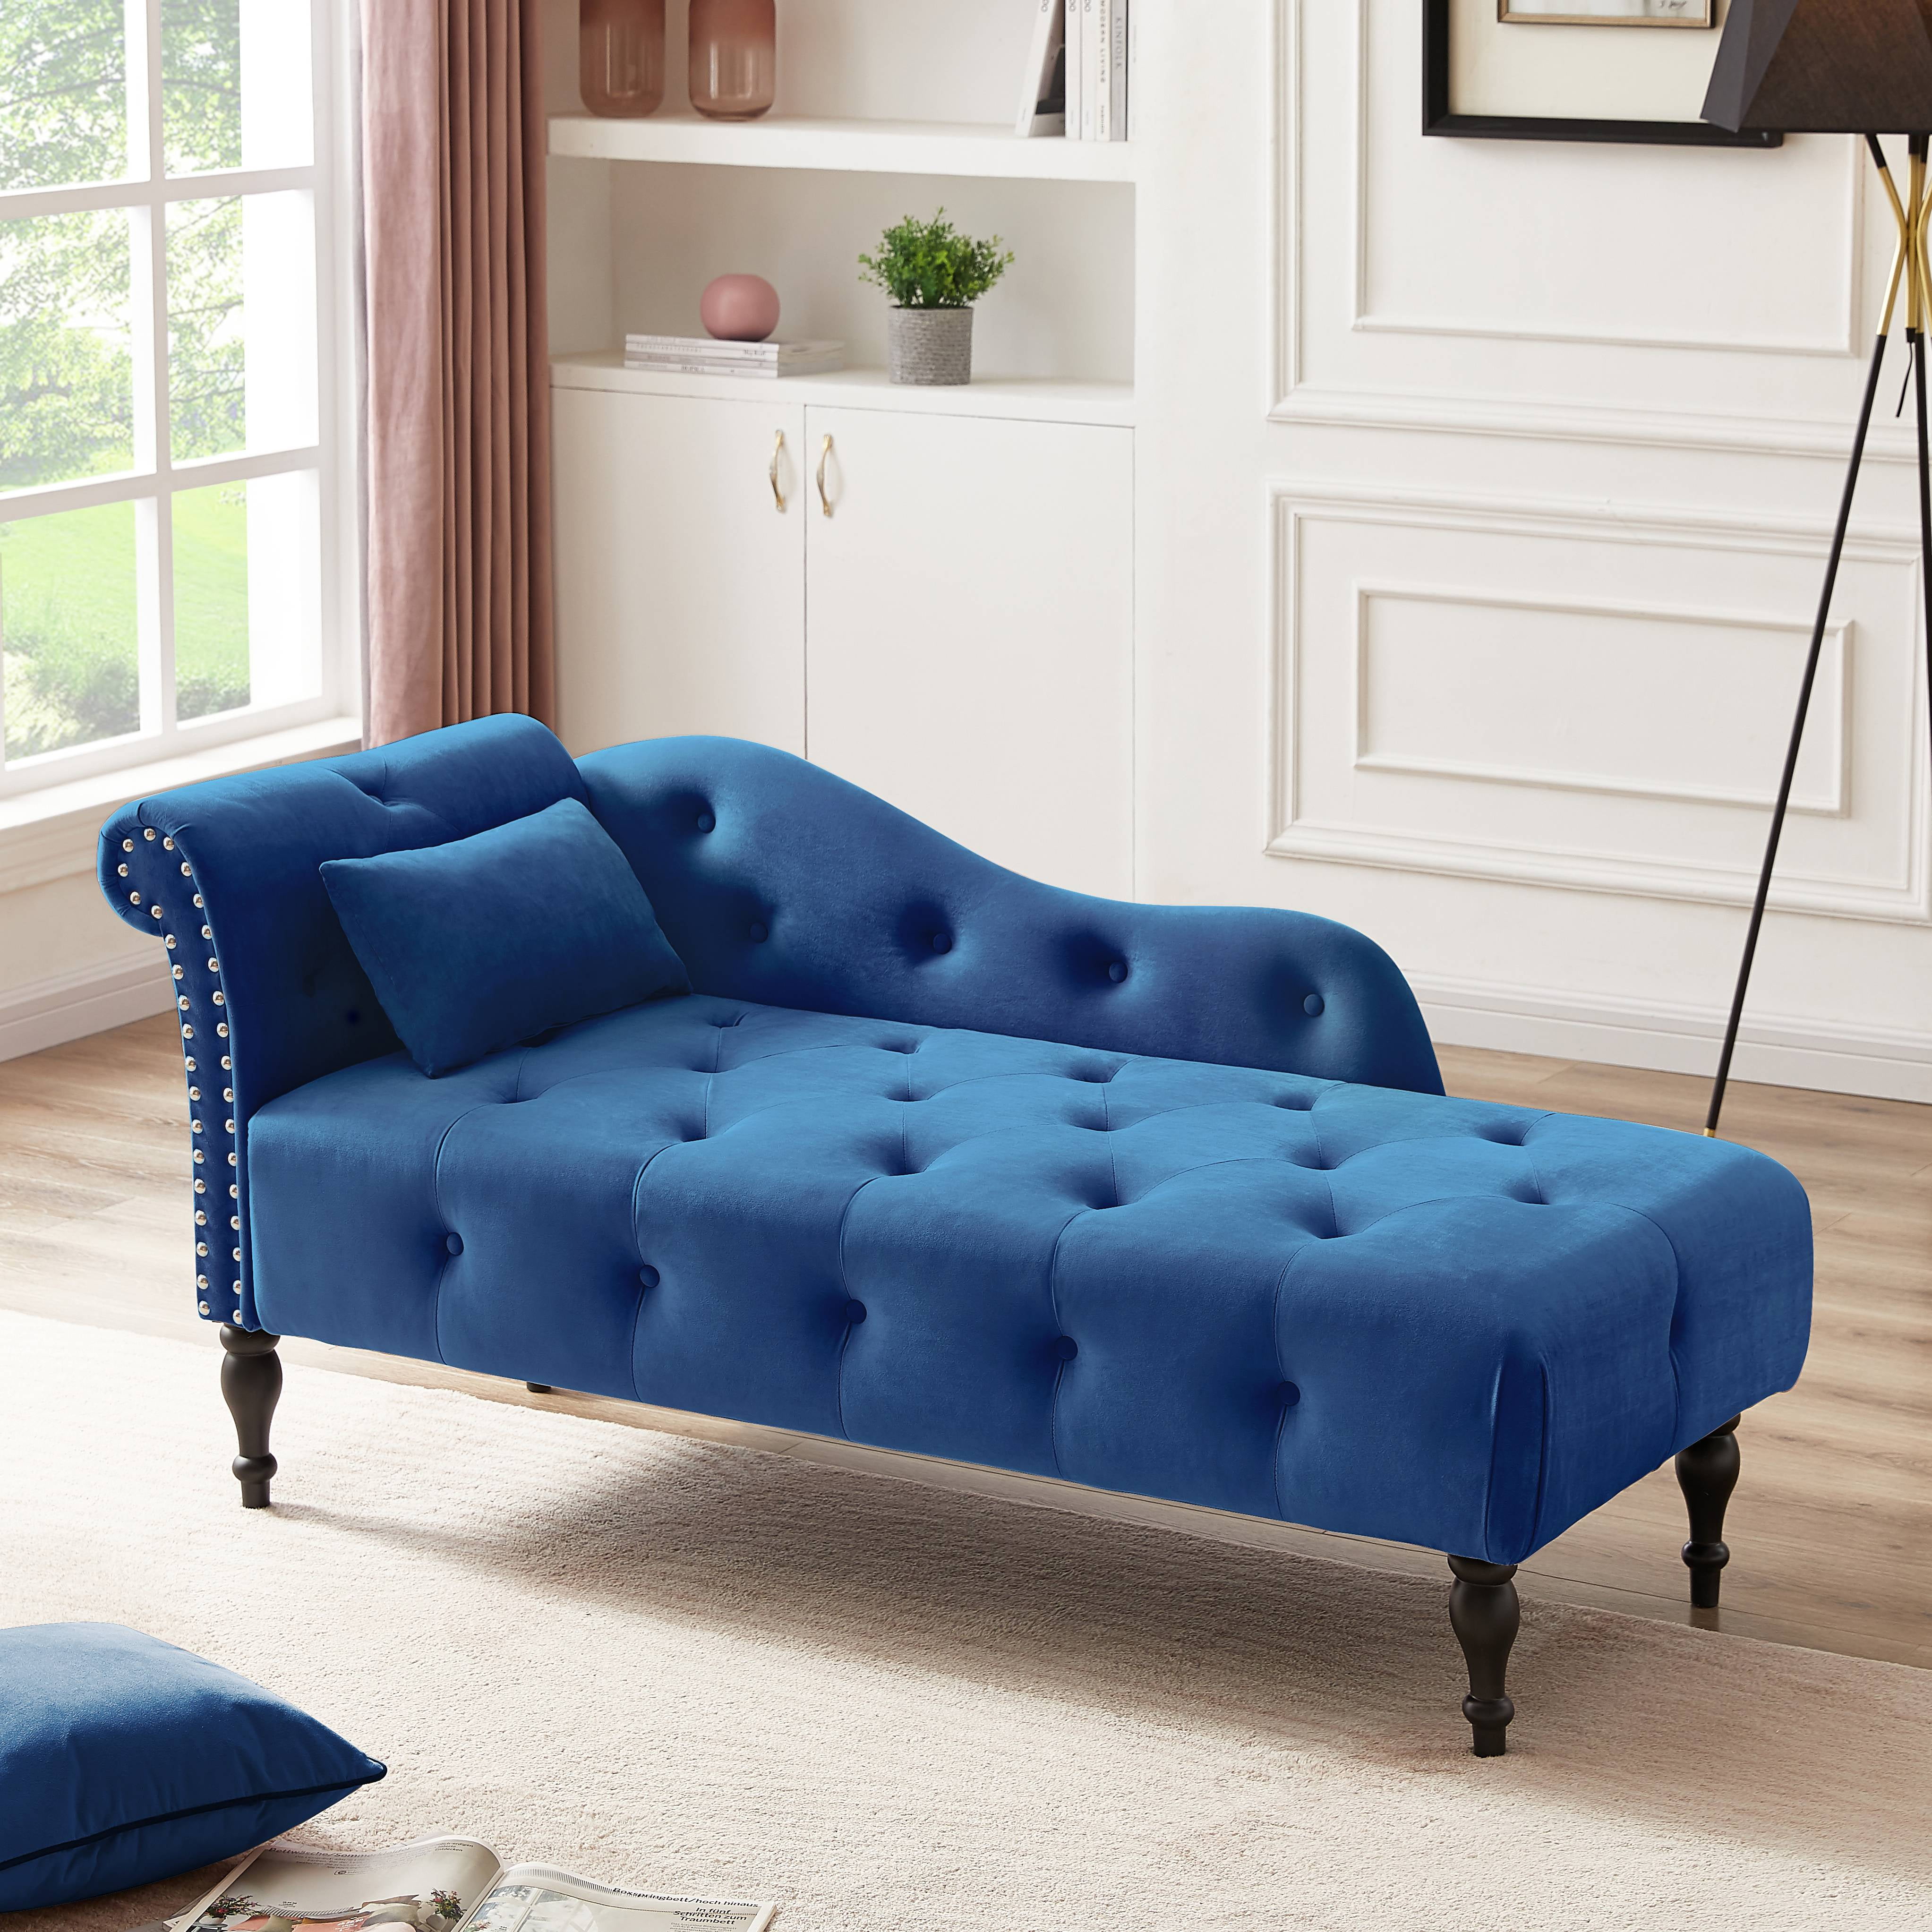 SYNGAR Tufted Upholstered Velvet Rolled Arm Chaise Lounges Indoor Chair, Right Arm Facing Chaise Lounge with Pillow, Nailhead Trim and Solid Wood Legs for Living Room Bedroom Office, Blue